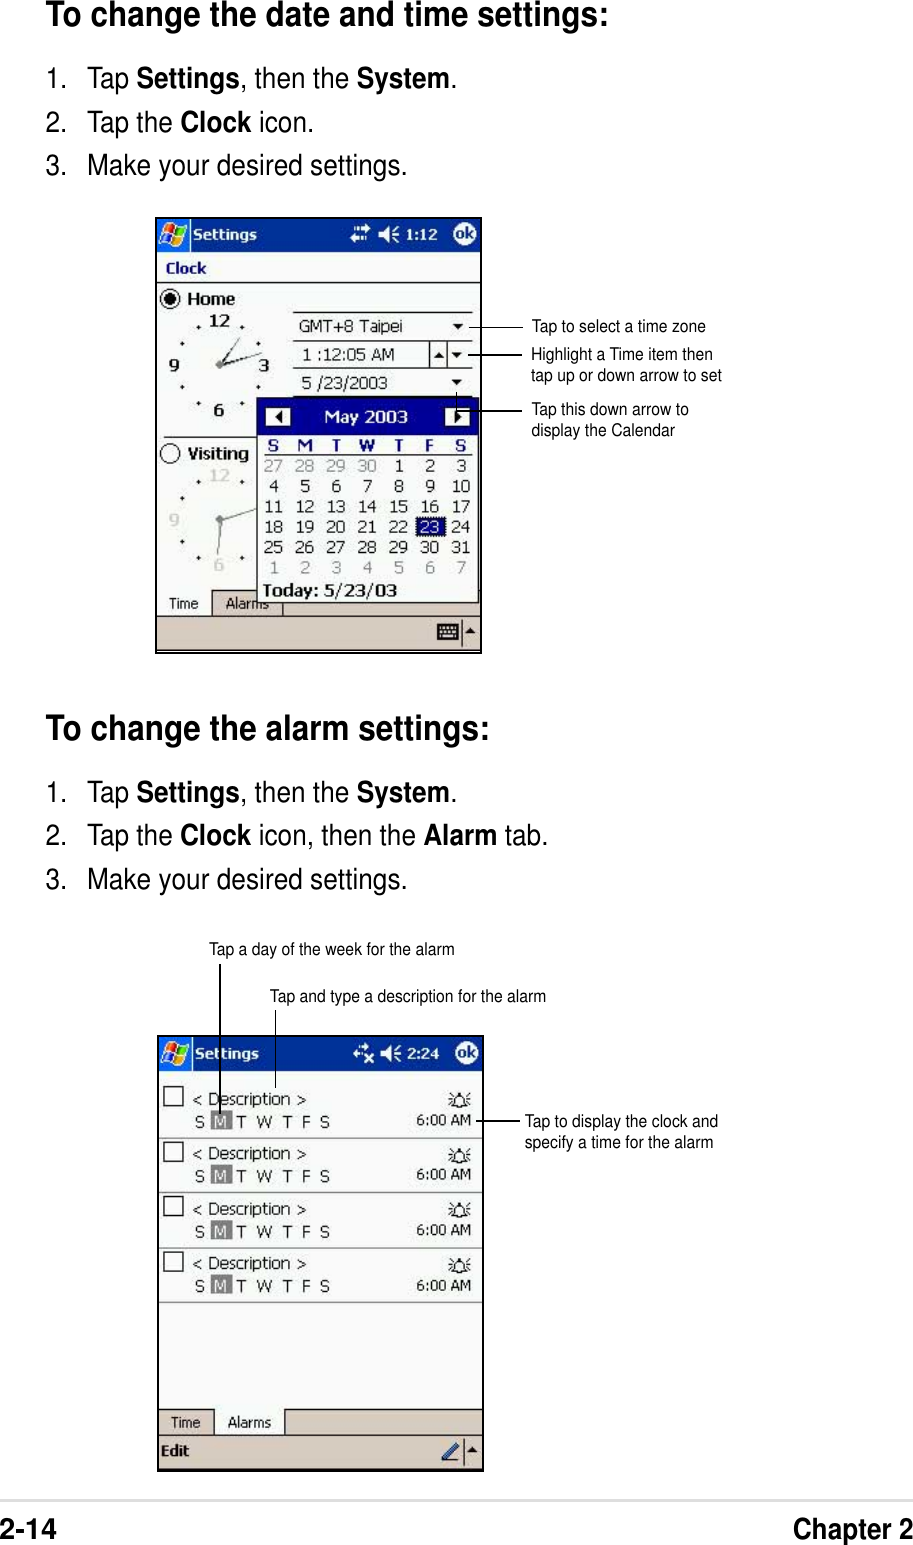 2-14Chapter 2To change the date and time settings:1. Tap Settings, then the System.2. Tap the Clock icon.3. Make your desired settings.Tap to select a time zoneHighlight a Time item thentap up or down arrow to setTap this down arrow todisplay the CalendarTo change the alarm settings:1. Tap Settings, then the System.2. Tap the Clock icon, then the Alarm tab.3. Make your desired settings.Tap a day of the week for the alarmTap and type a description for the alarmTap to display the clock andspecify a time for the alarm